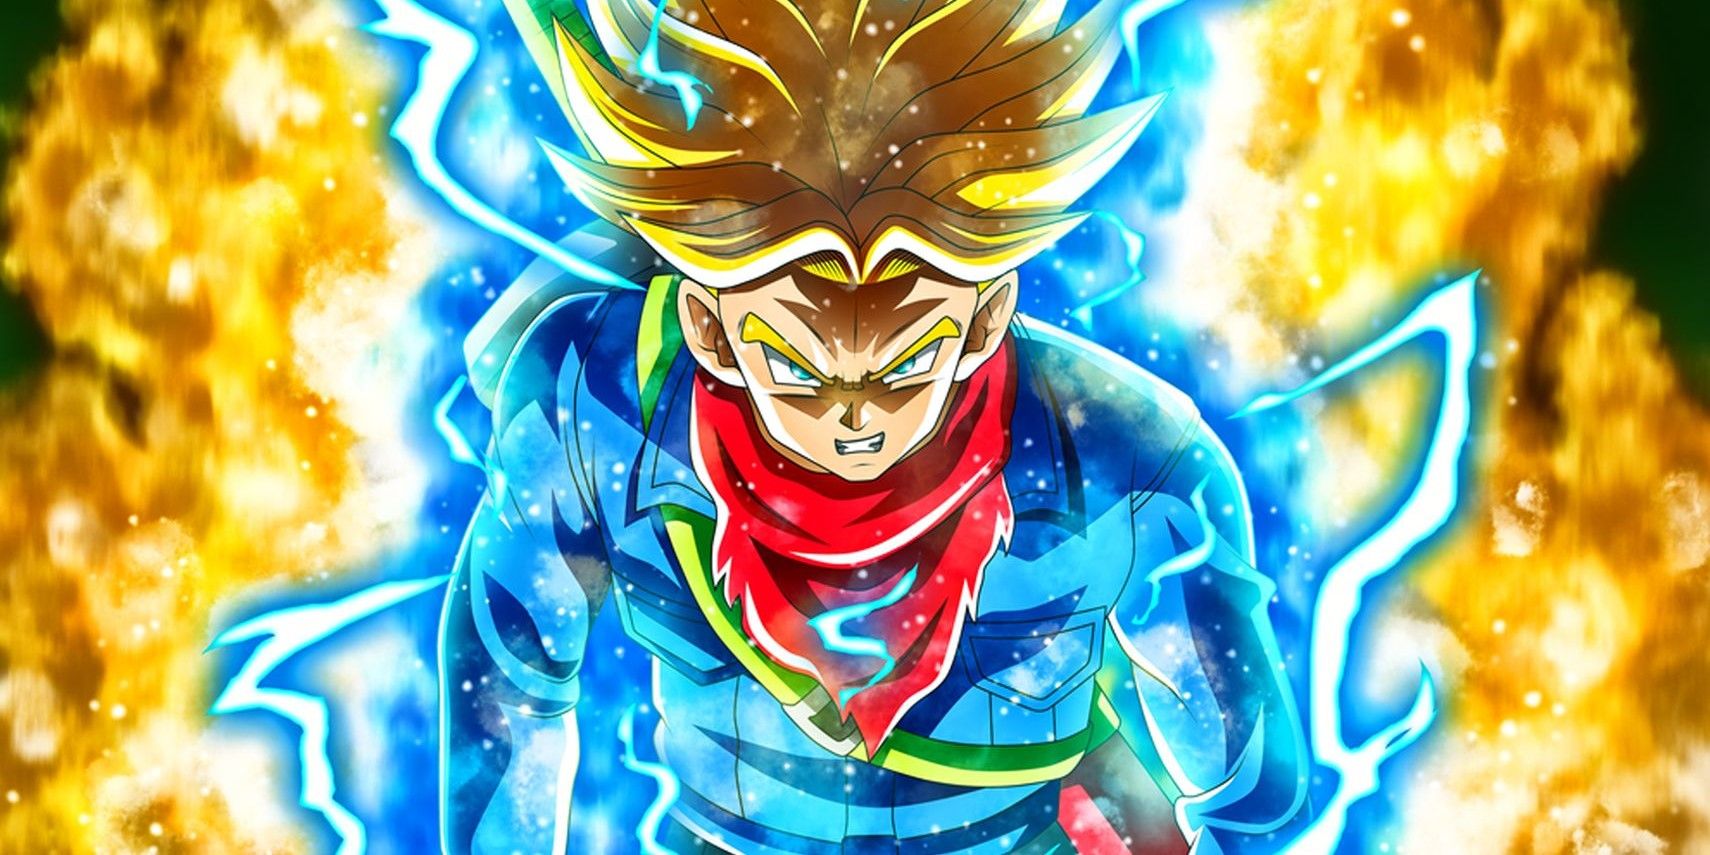 An image of Future Trunks in Super Saiyan Rage form during Dragon Ball Super